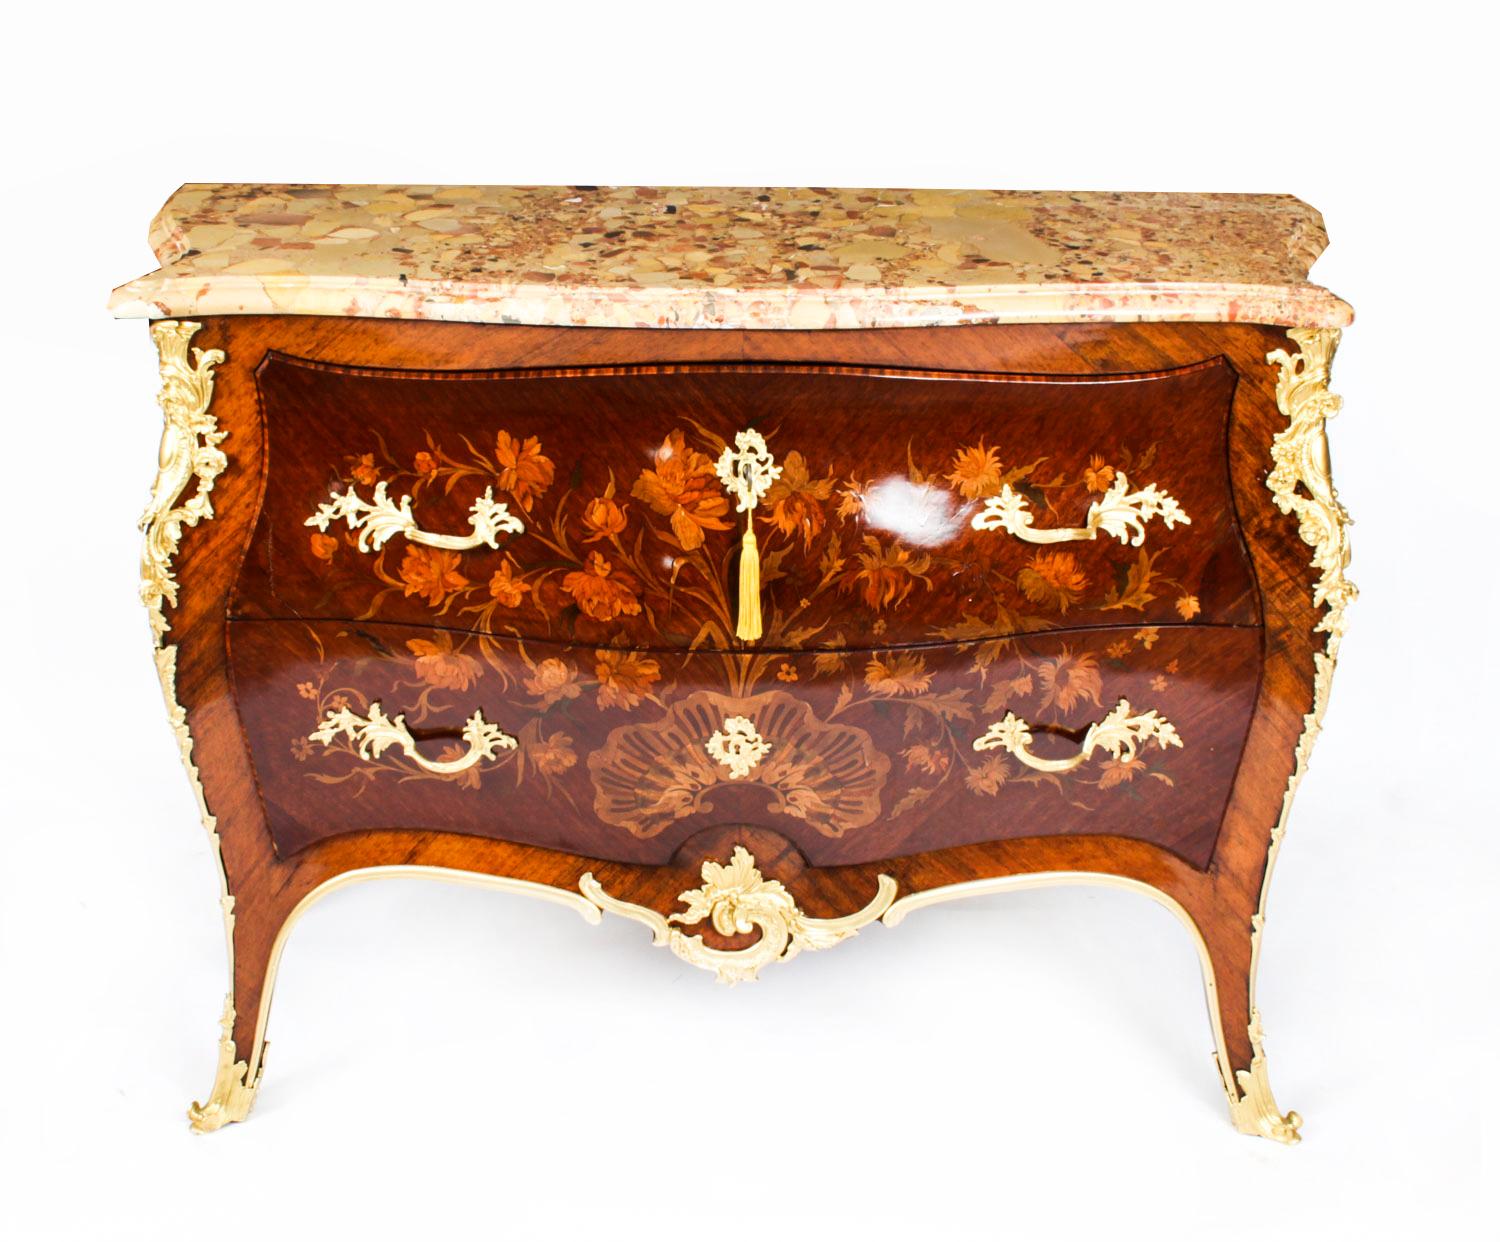 This is a beautiful antique French Louis XV Revival walnut and marquetry commode, circa 1860 in date.
 
It has a stunning shaped Italian Breccia marble top above two drawers finely inlaid with scrolling foliate and floral marquetry and featuring